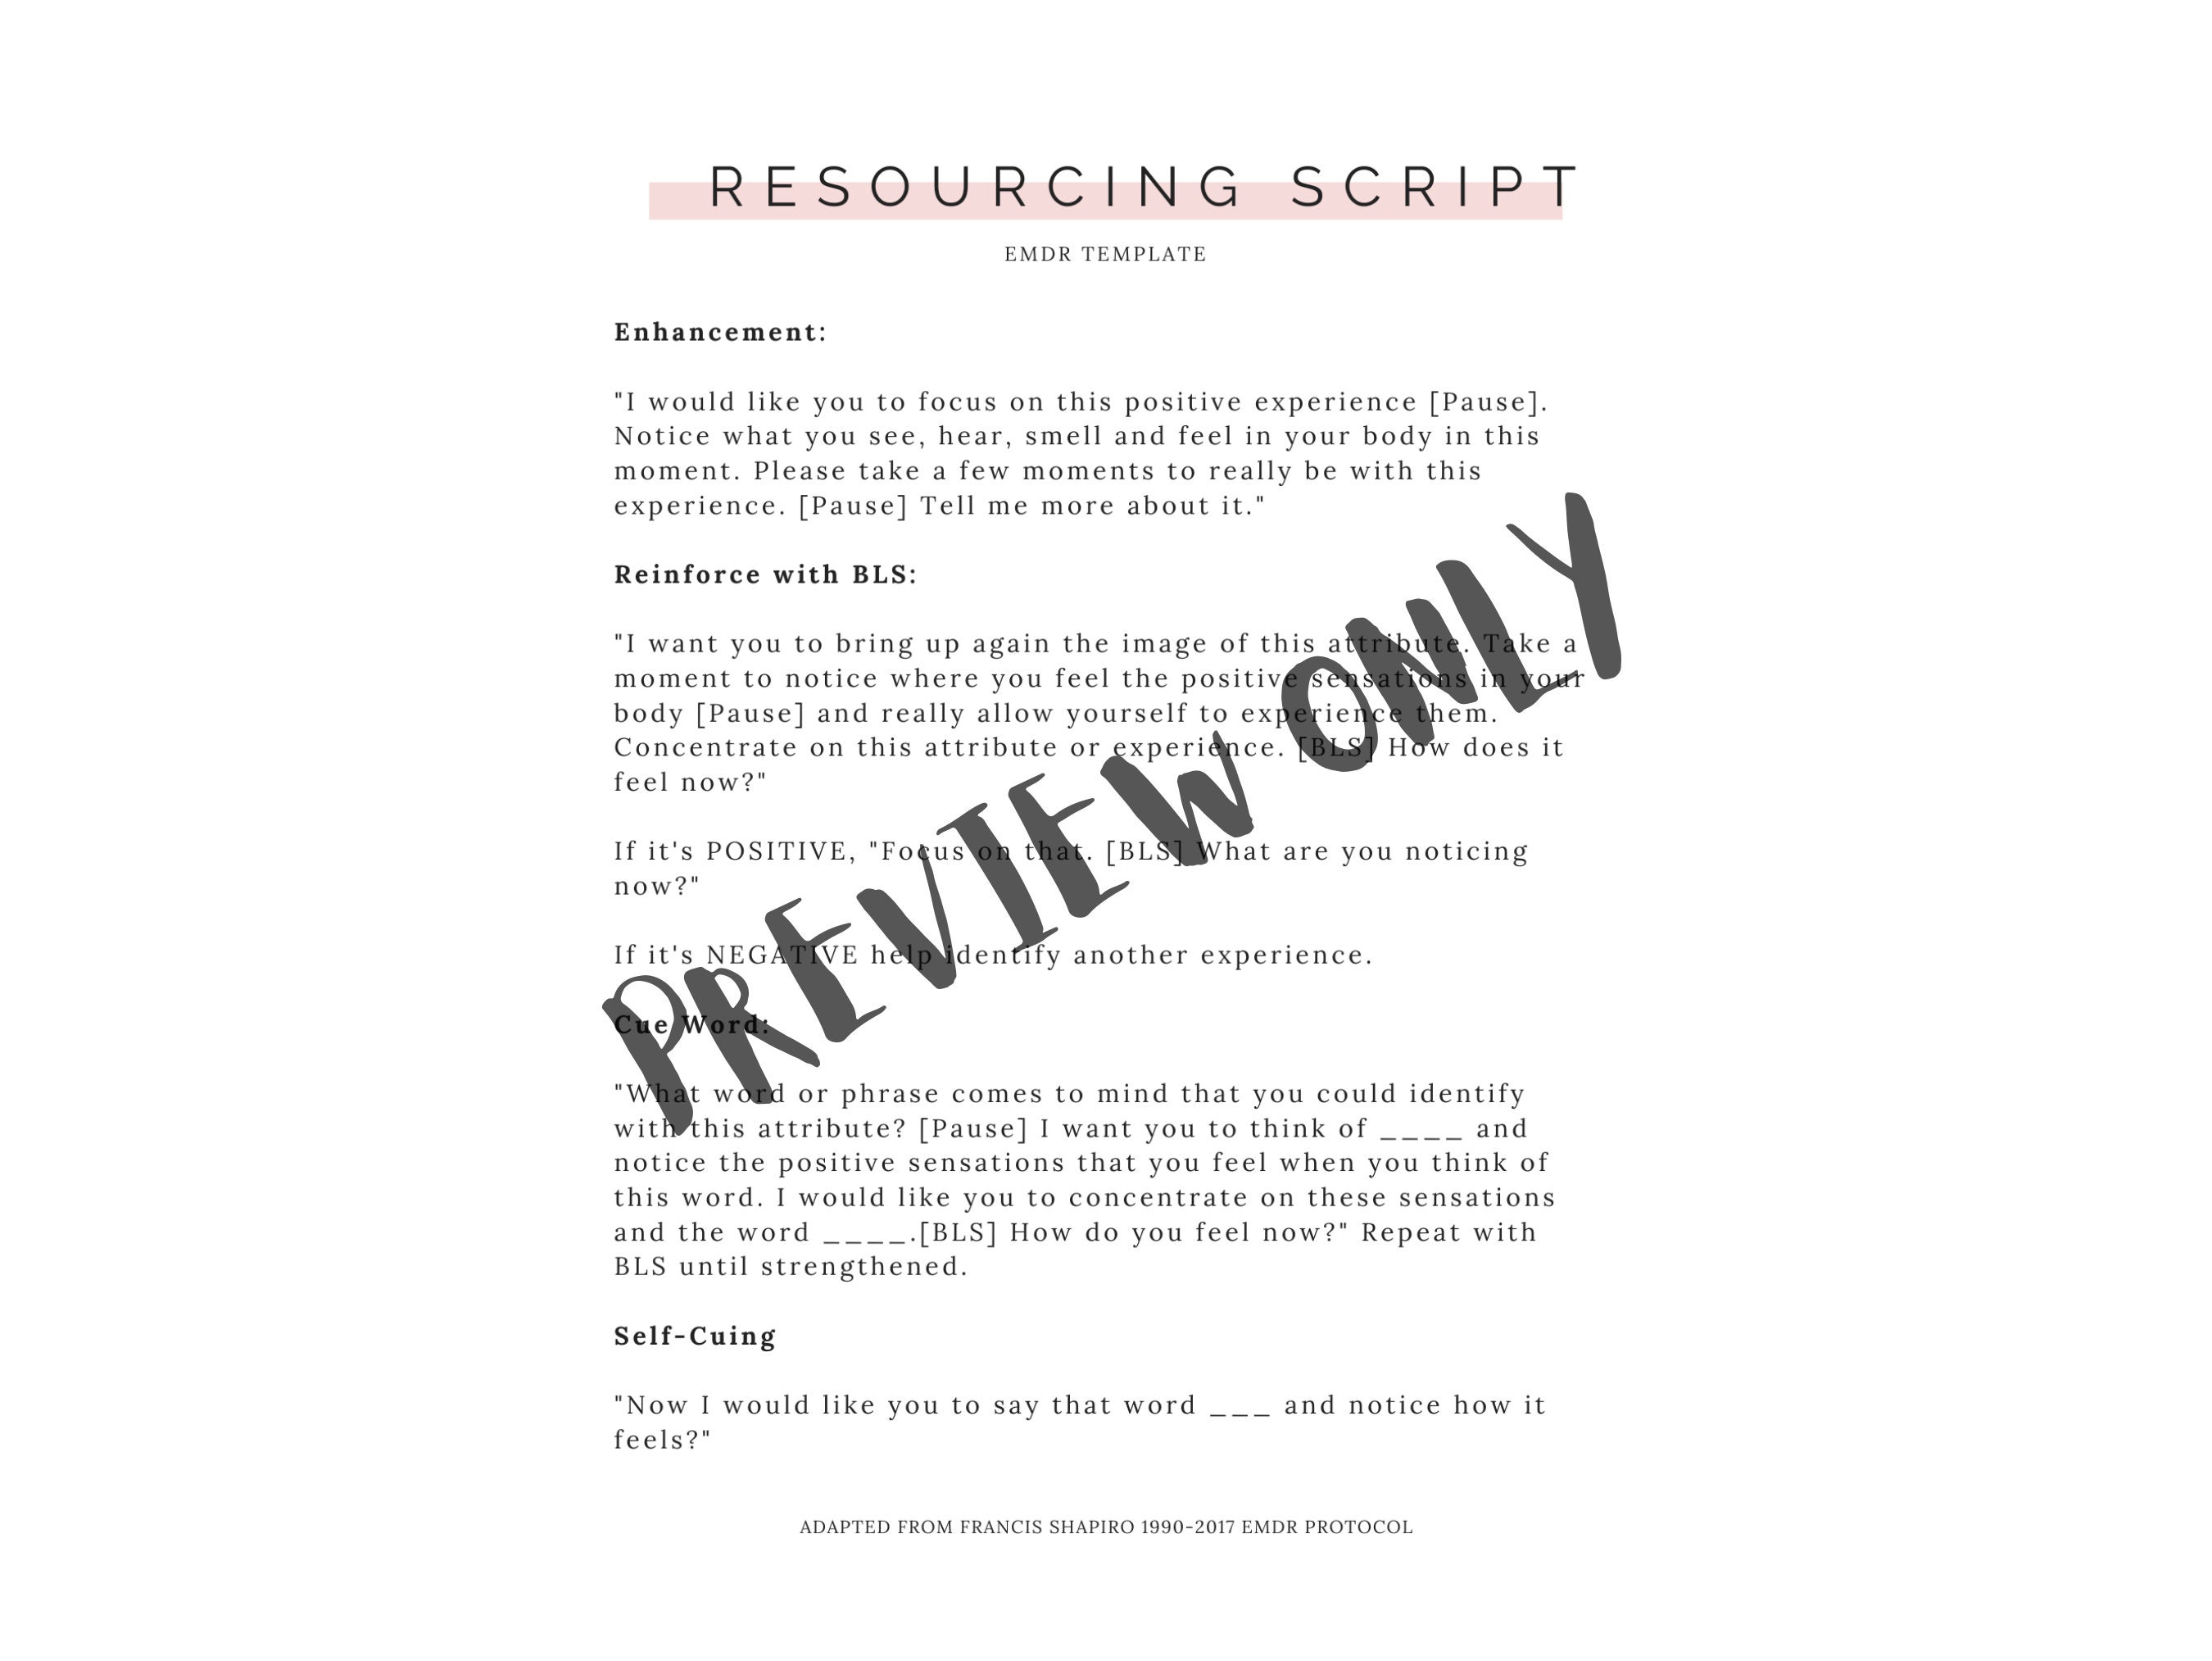 emdr-future-template-and-resourcing-script-emdr-therapy-etsy-uk